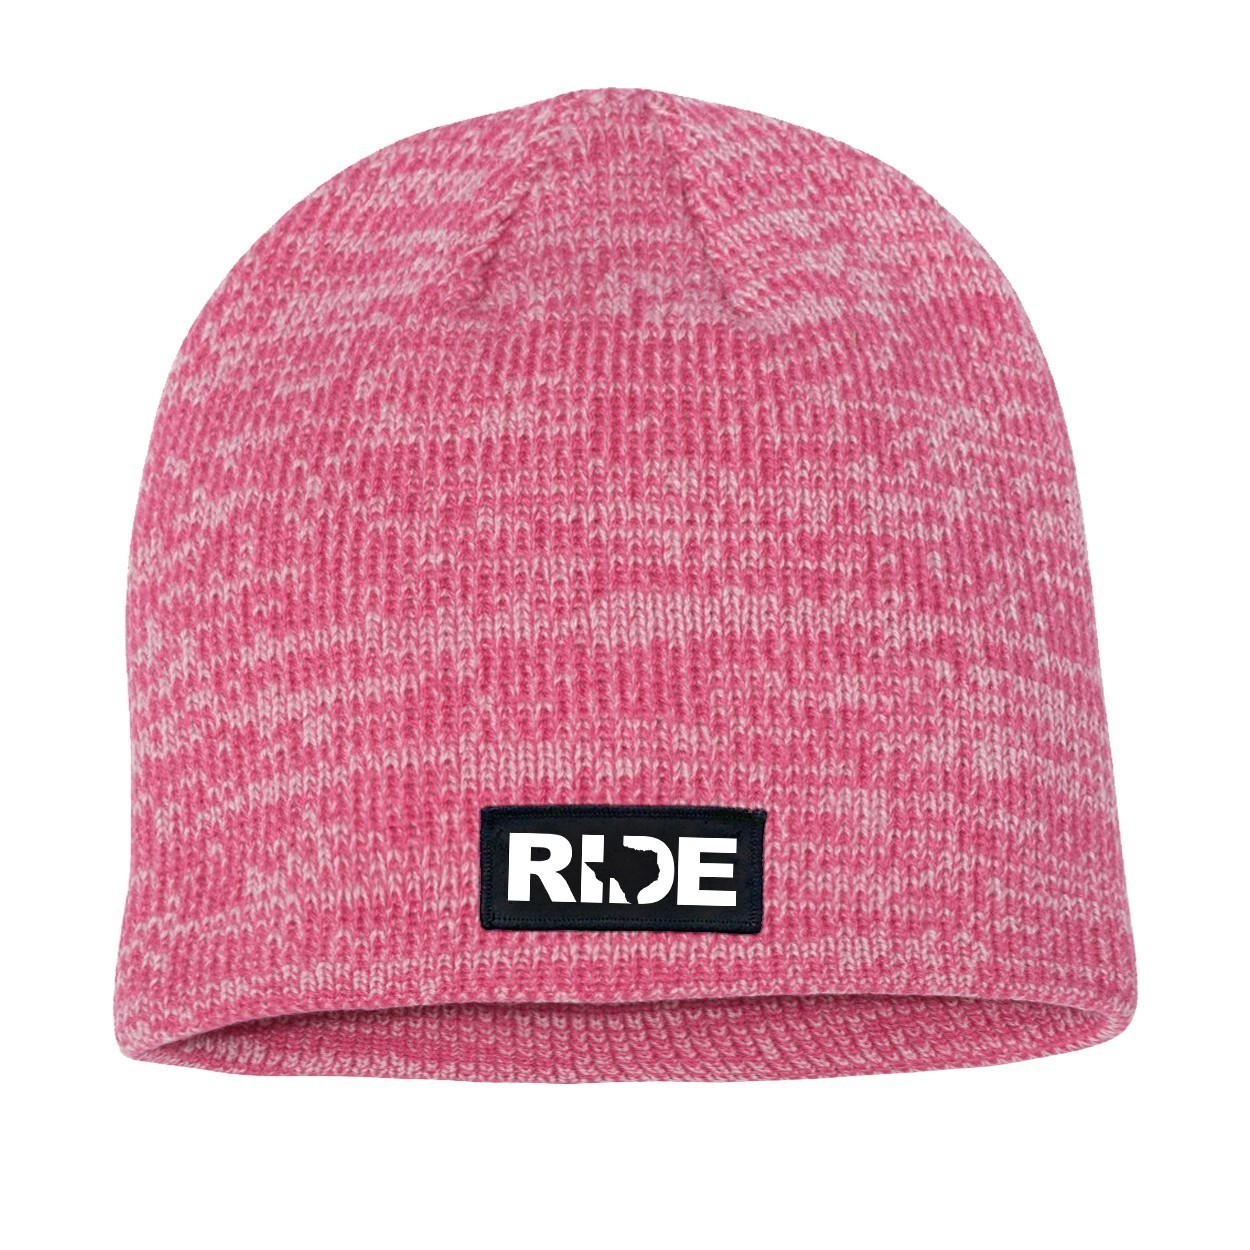 Ride Texas Night Out Woven Patch Skully Marled Knit Beanie Pink/Dark Pink (White Logo)